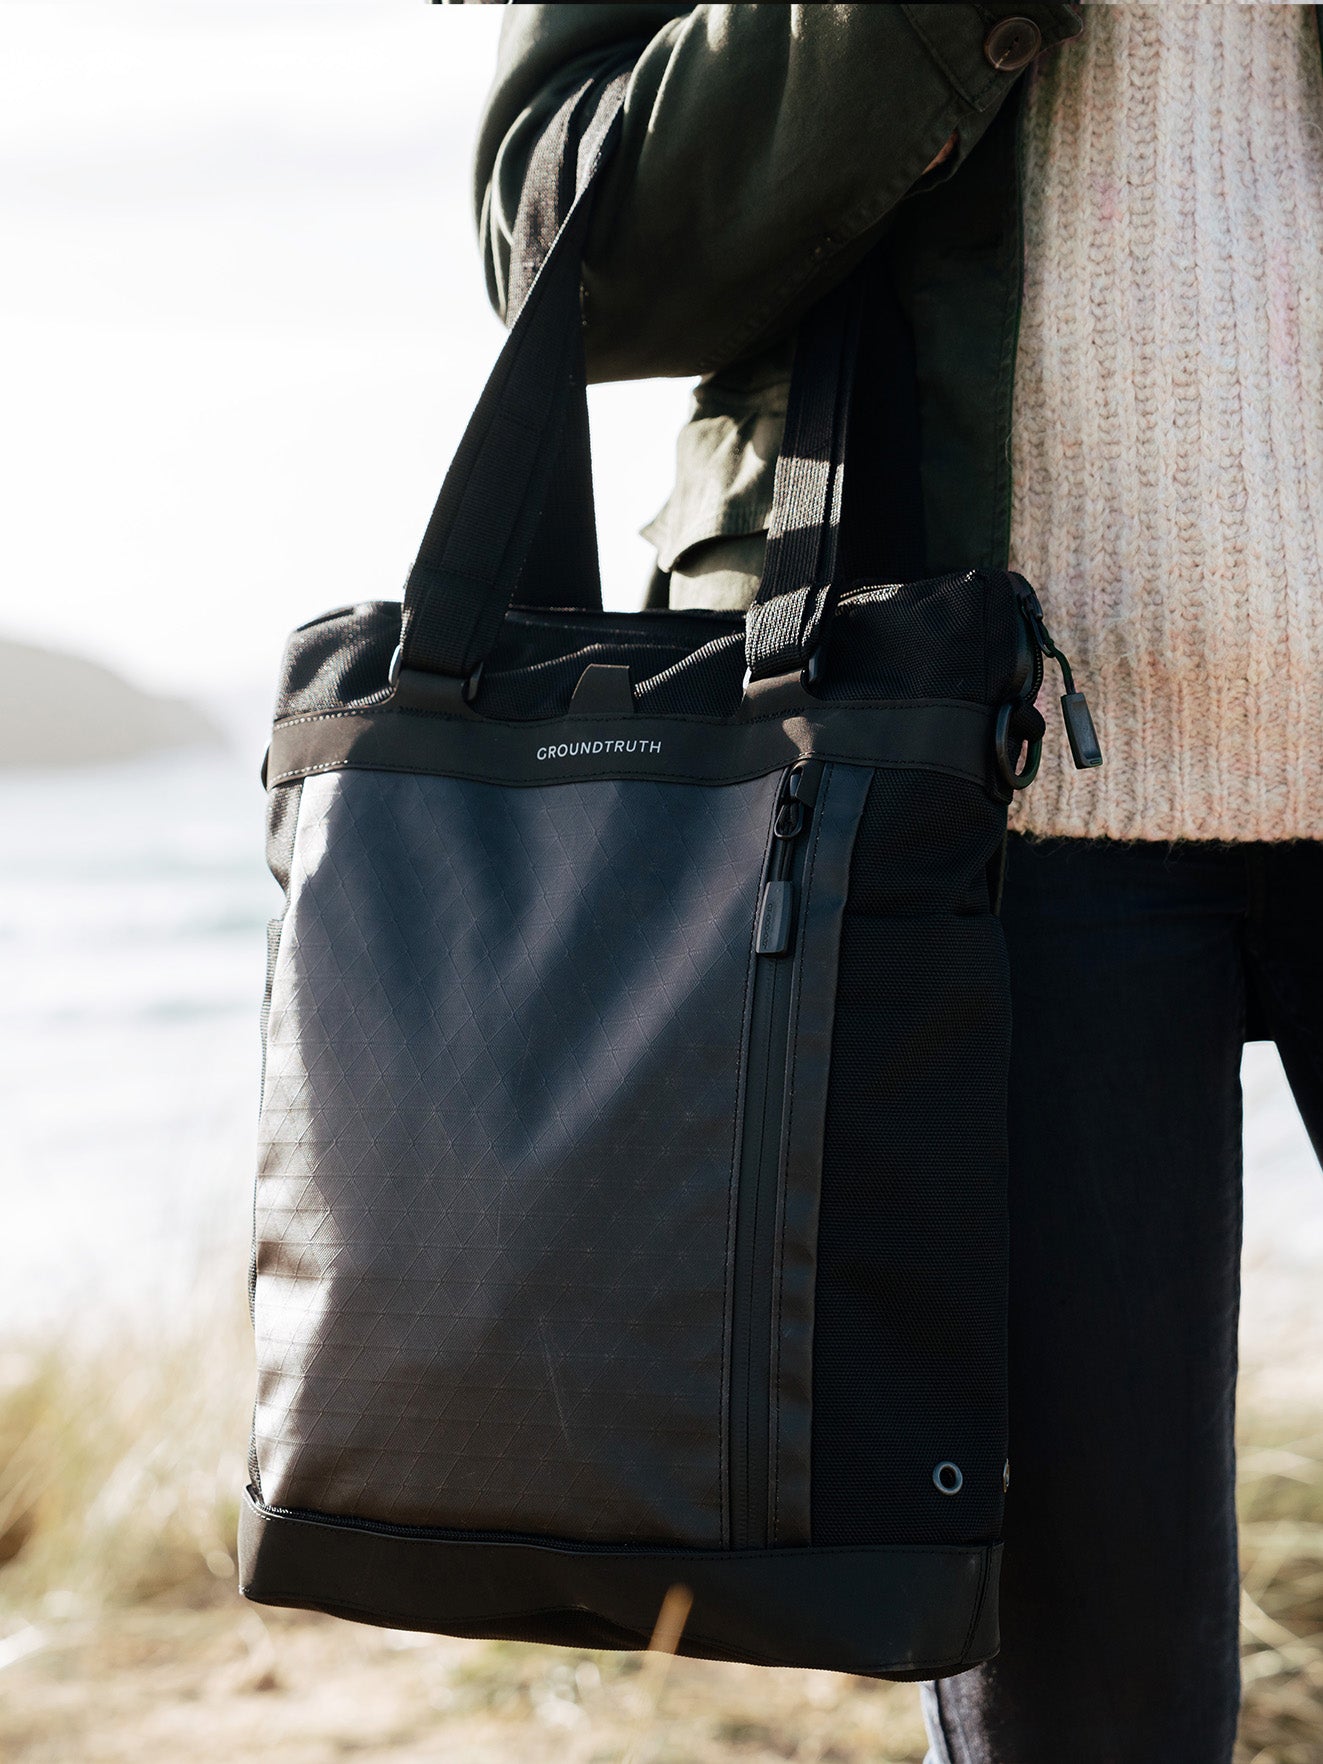 The 10L Tote Pack for everyday use.